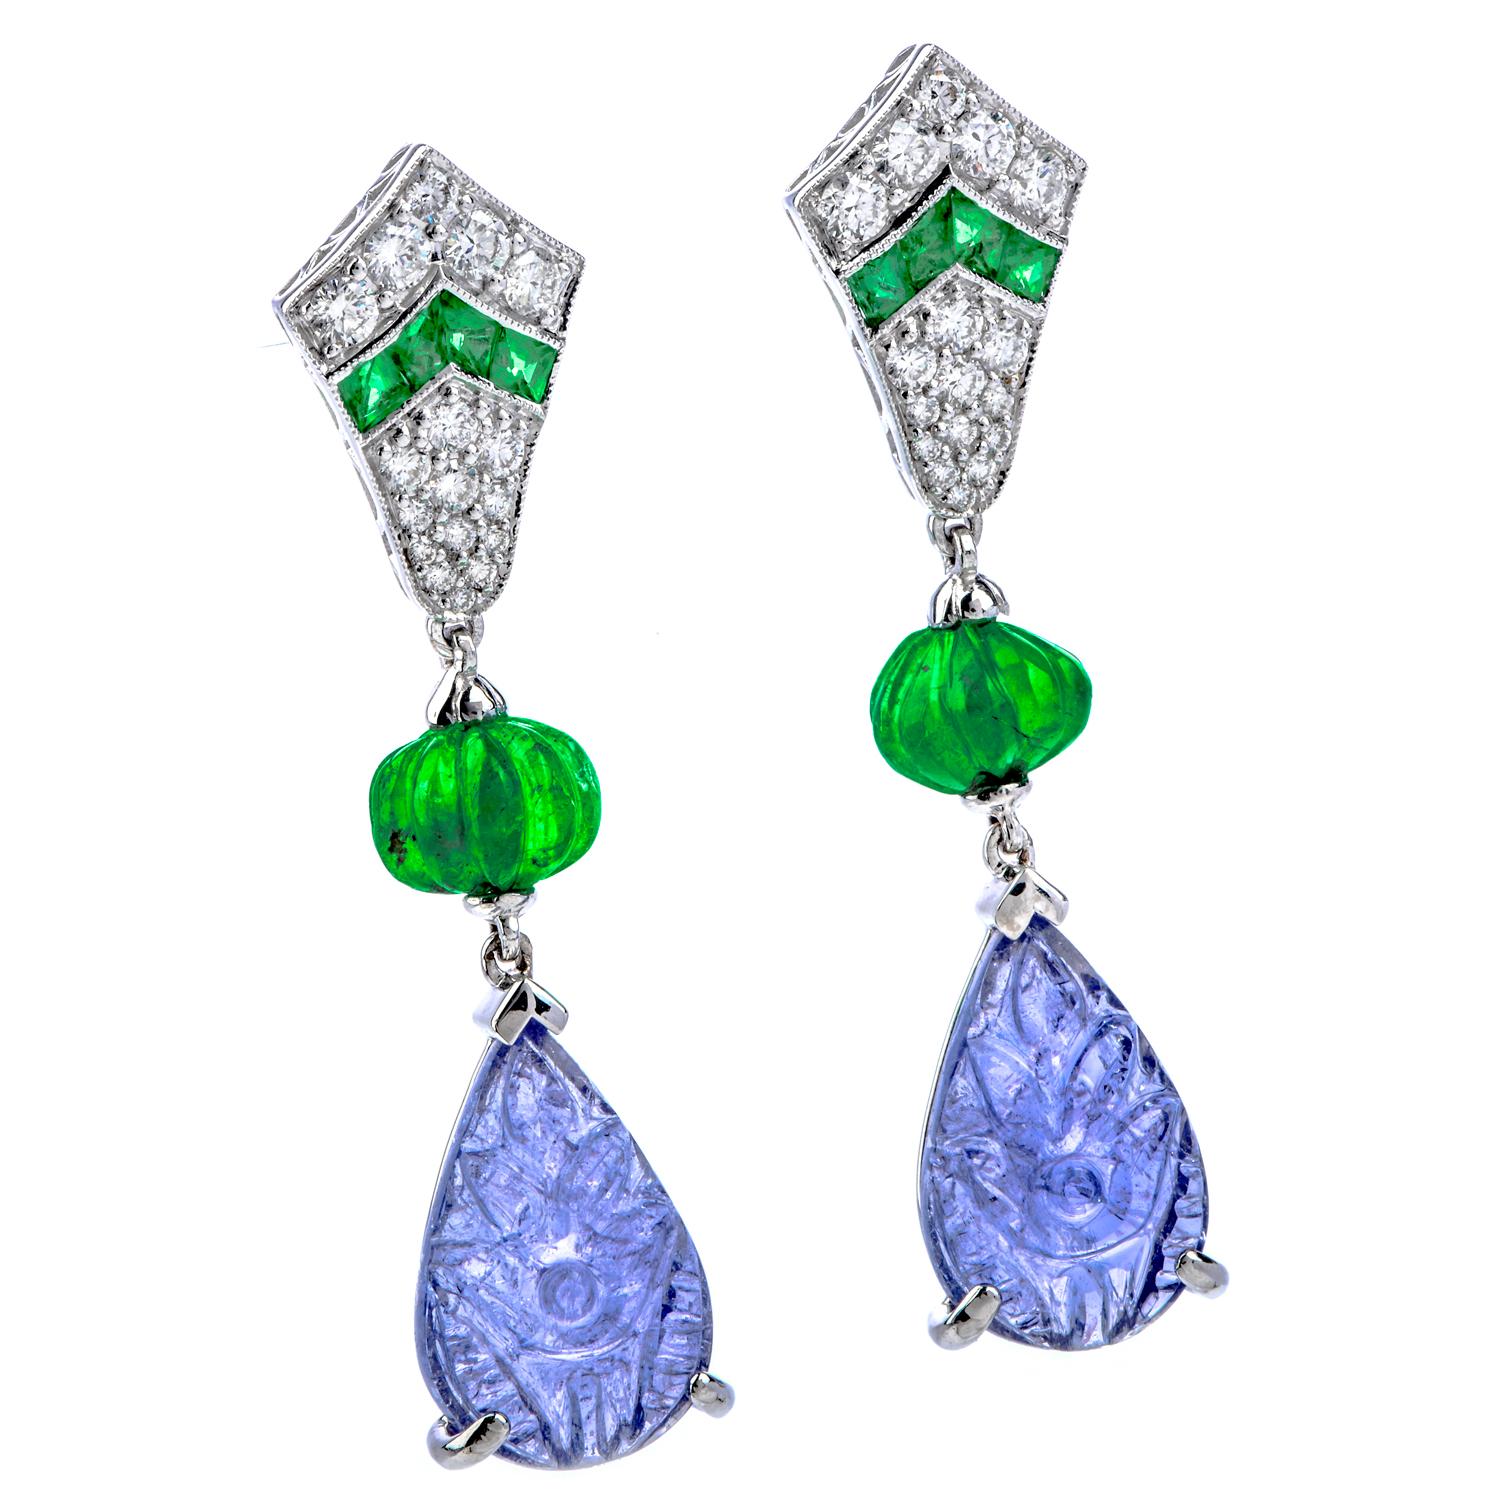 Feel unique and ethereal in with these Estate Diamond Emerald Tanzanite Carved Drop Dangle Earrings! These earrings are carefully crafted in 18 karat white gold with post backings for pierced ears.  There are two pear-shaped, carved genuine